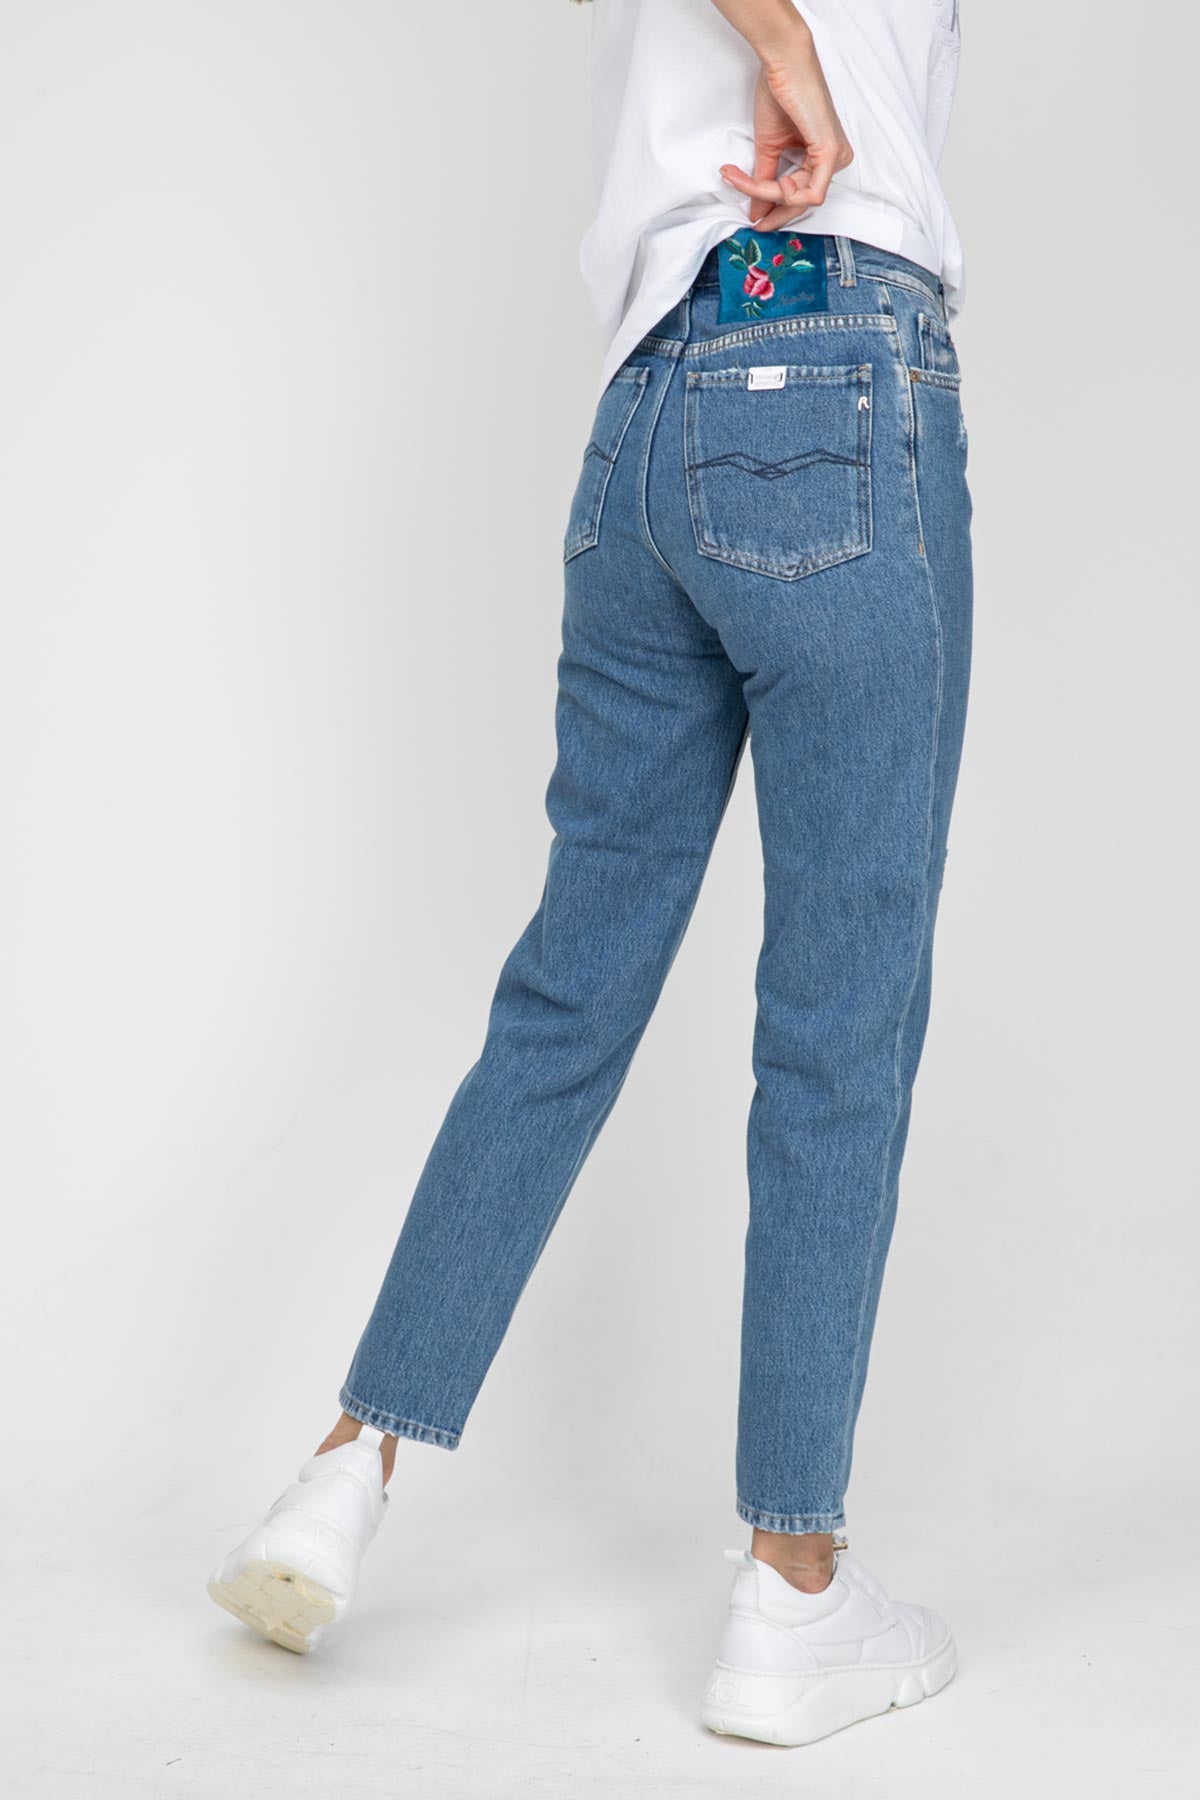 Replay Kıley High Waist Tapered Fit Jeans-Libas Trendy Fashion Store